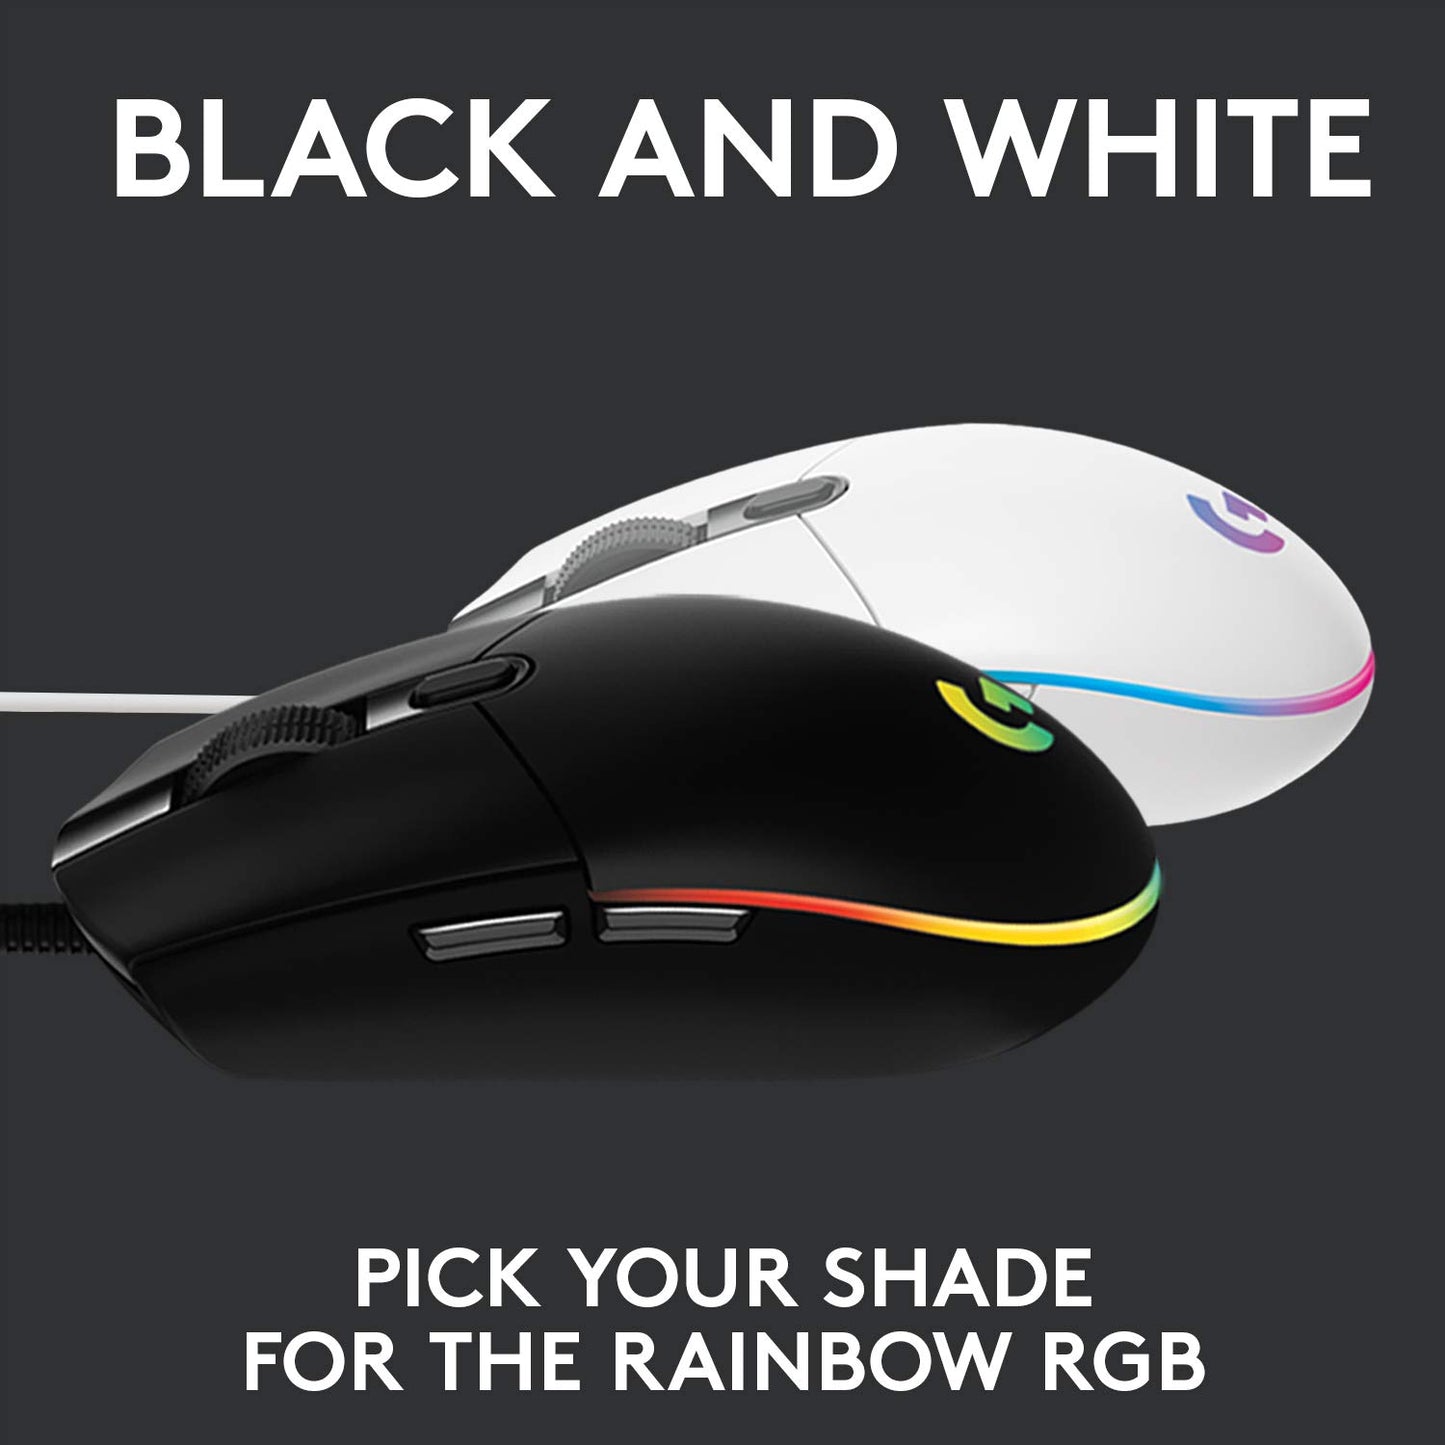 Logitech G102 Lightsync RGB Wired Optical Gaming Mouse - Black